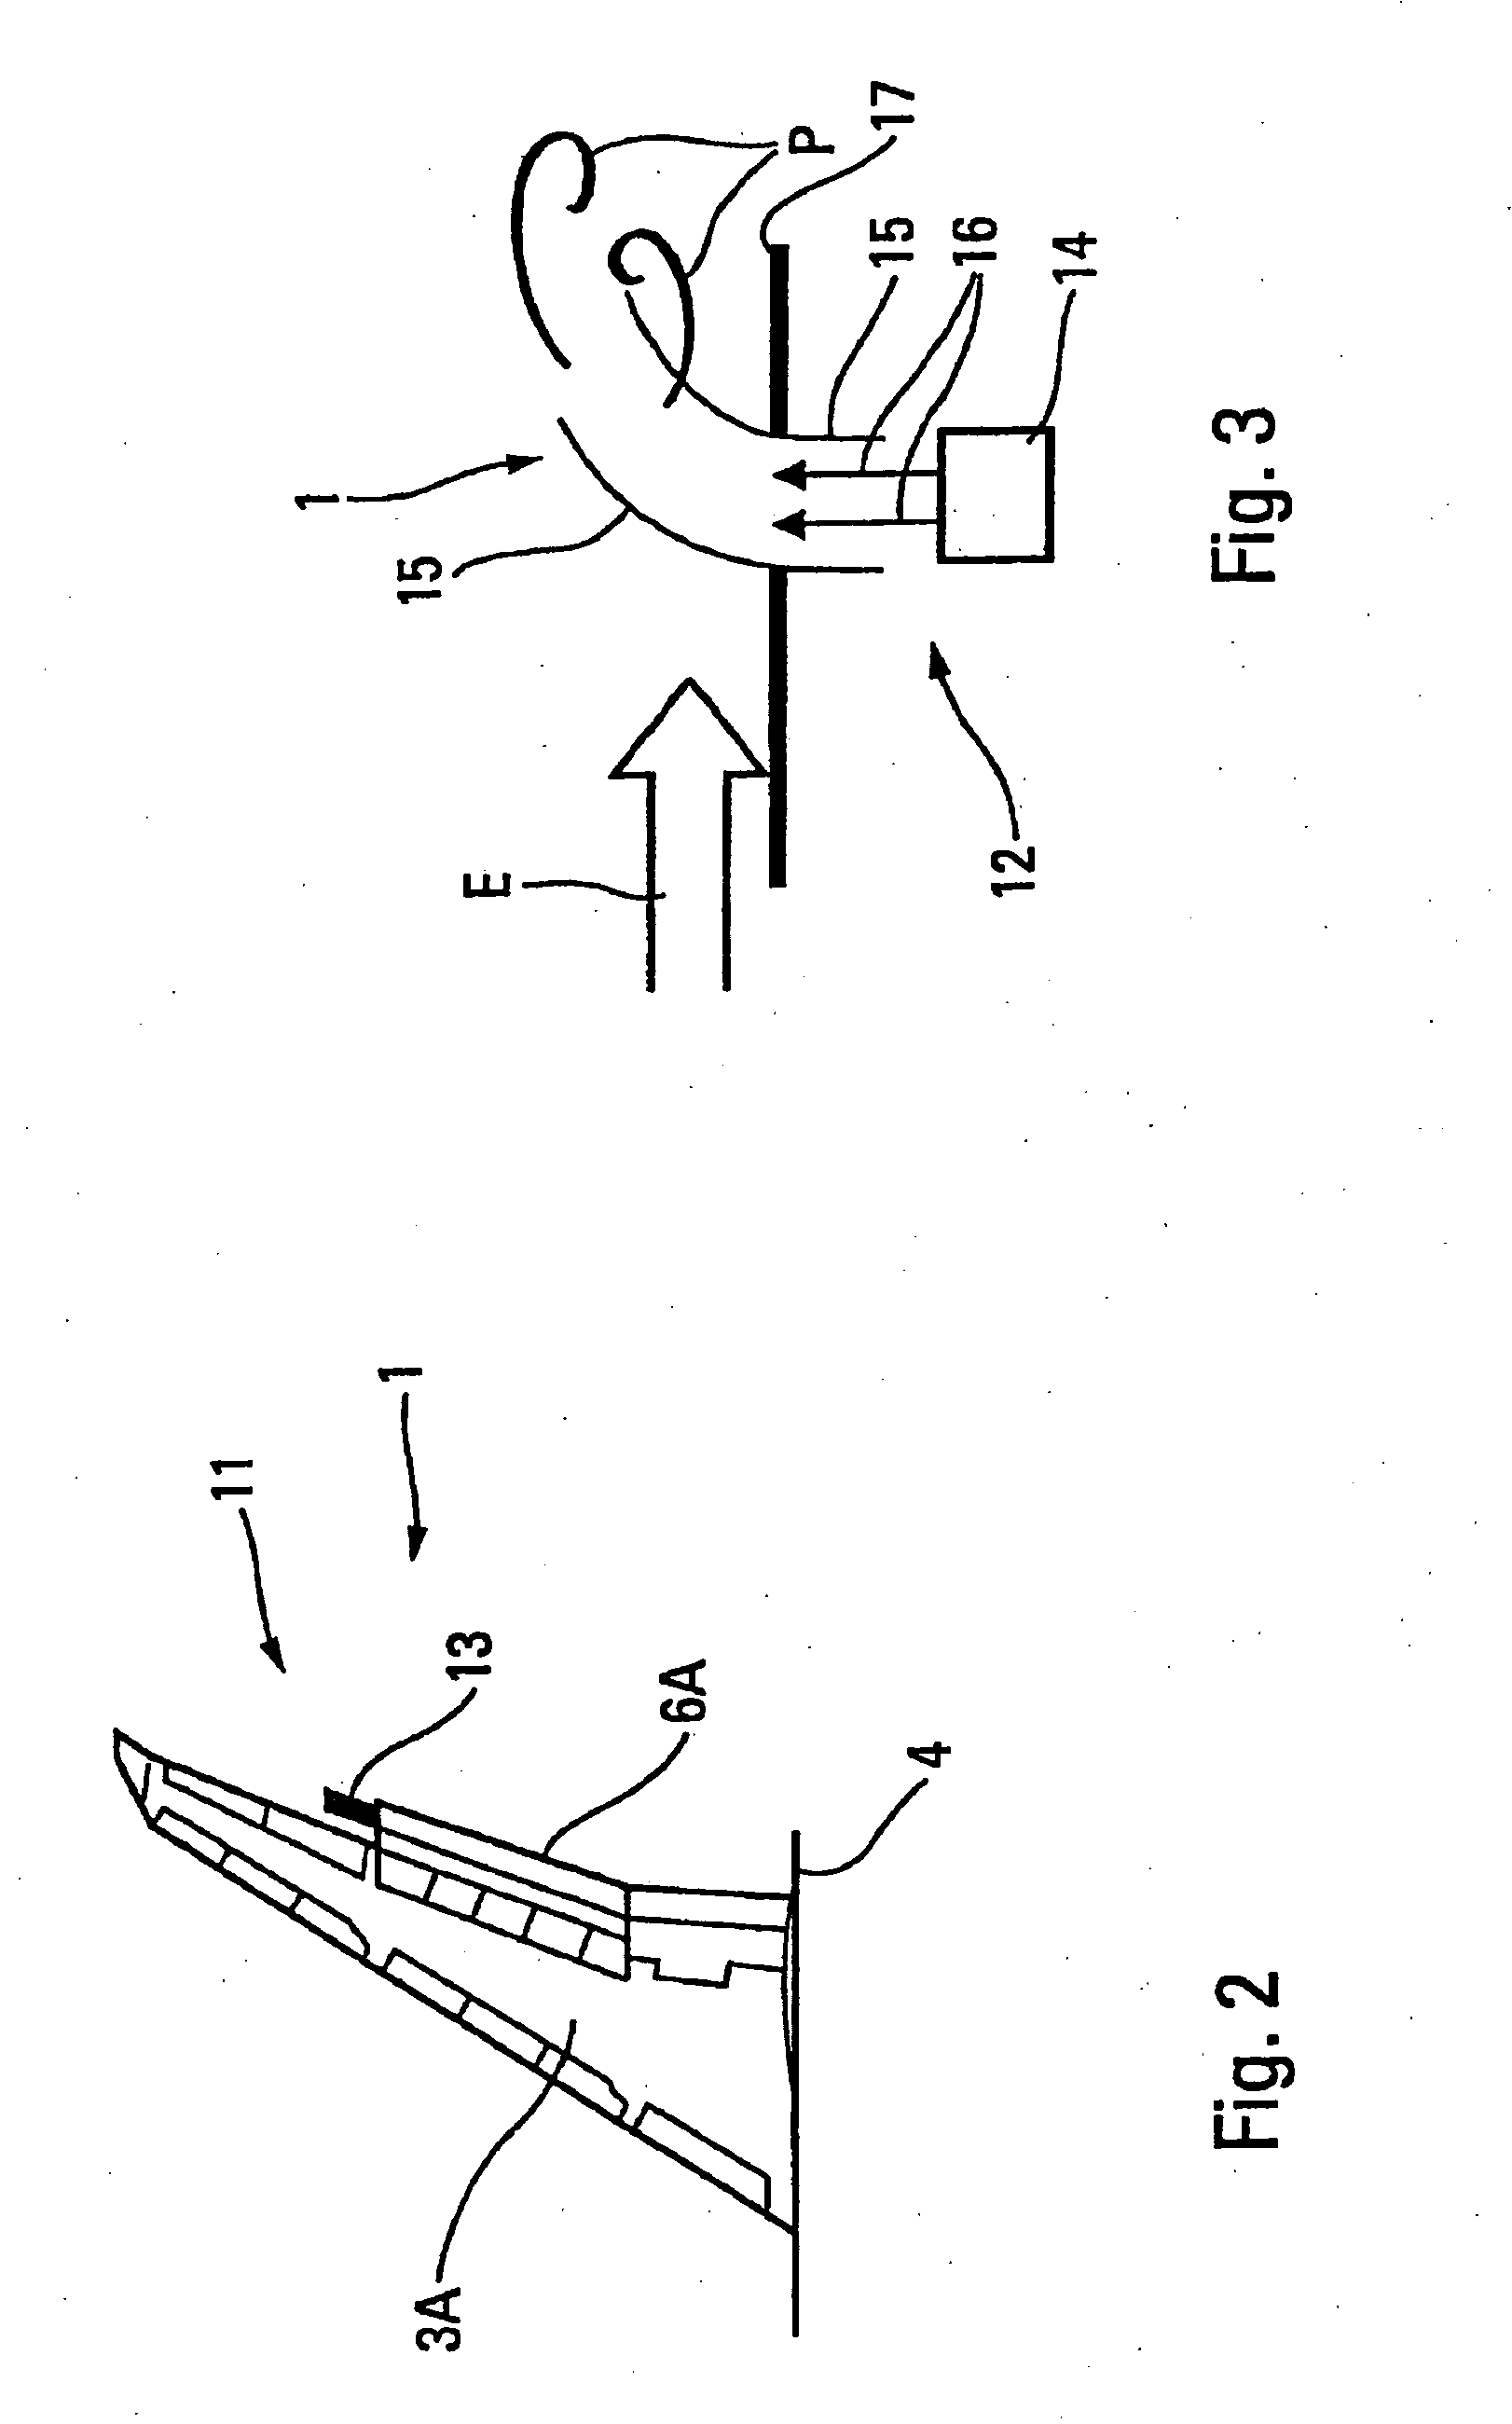 Apparatus for accelerating destruction of a vortex formed by a wing of an aircraft